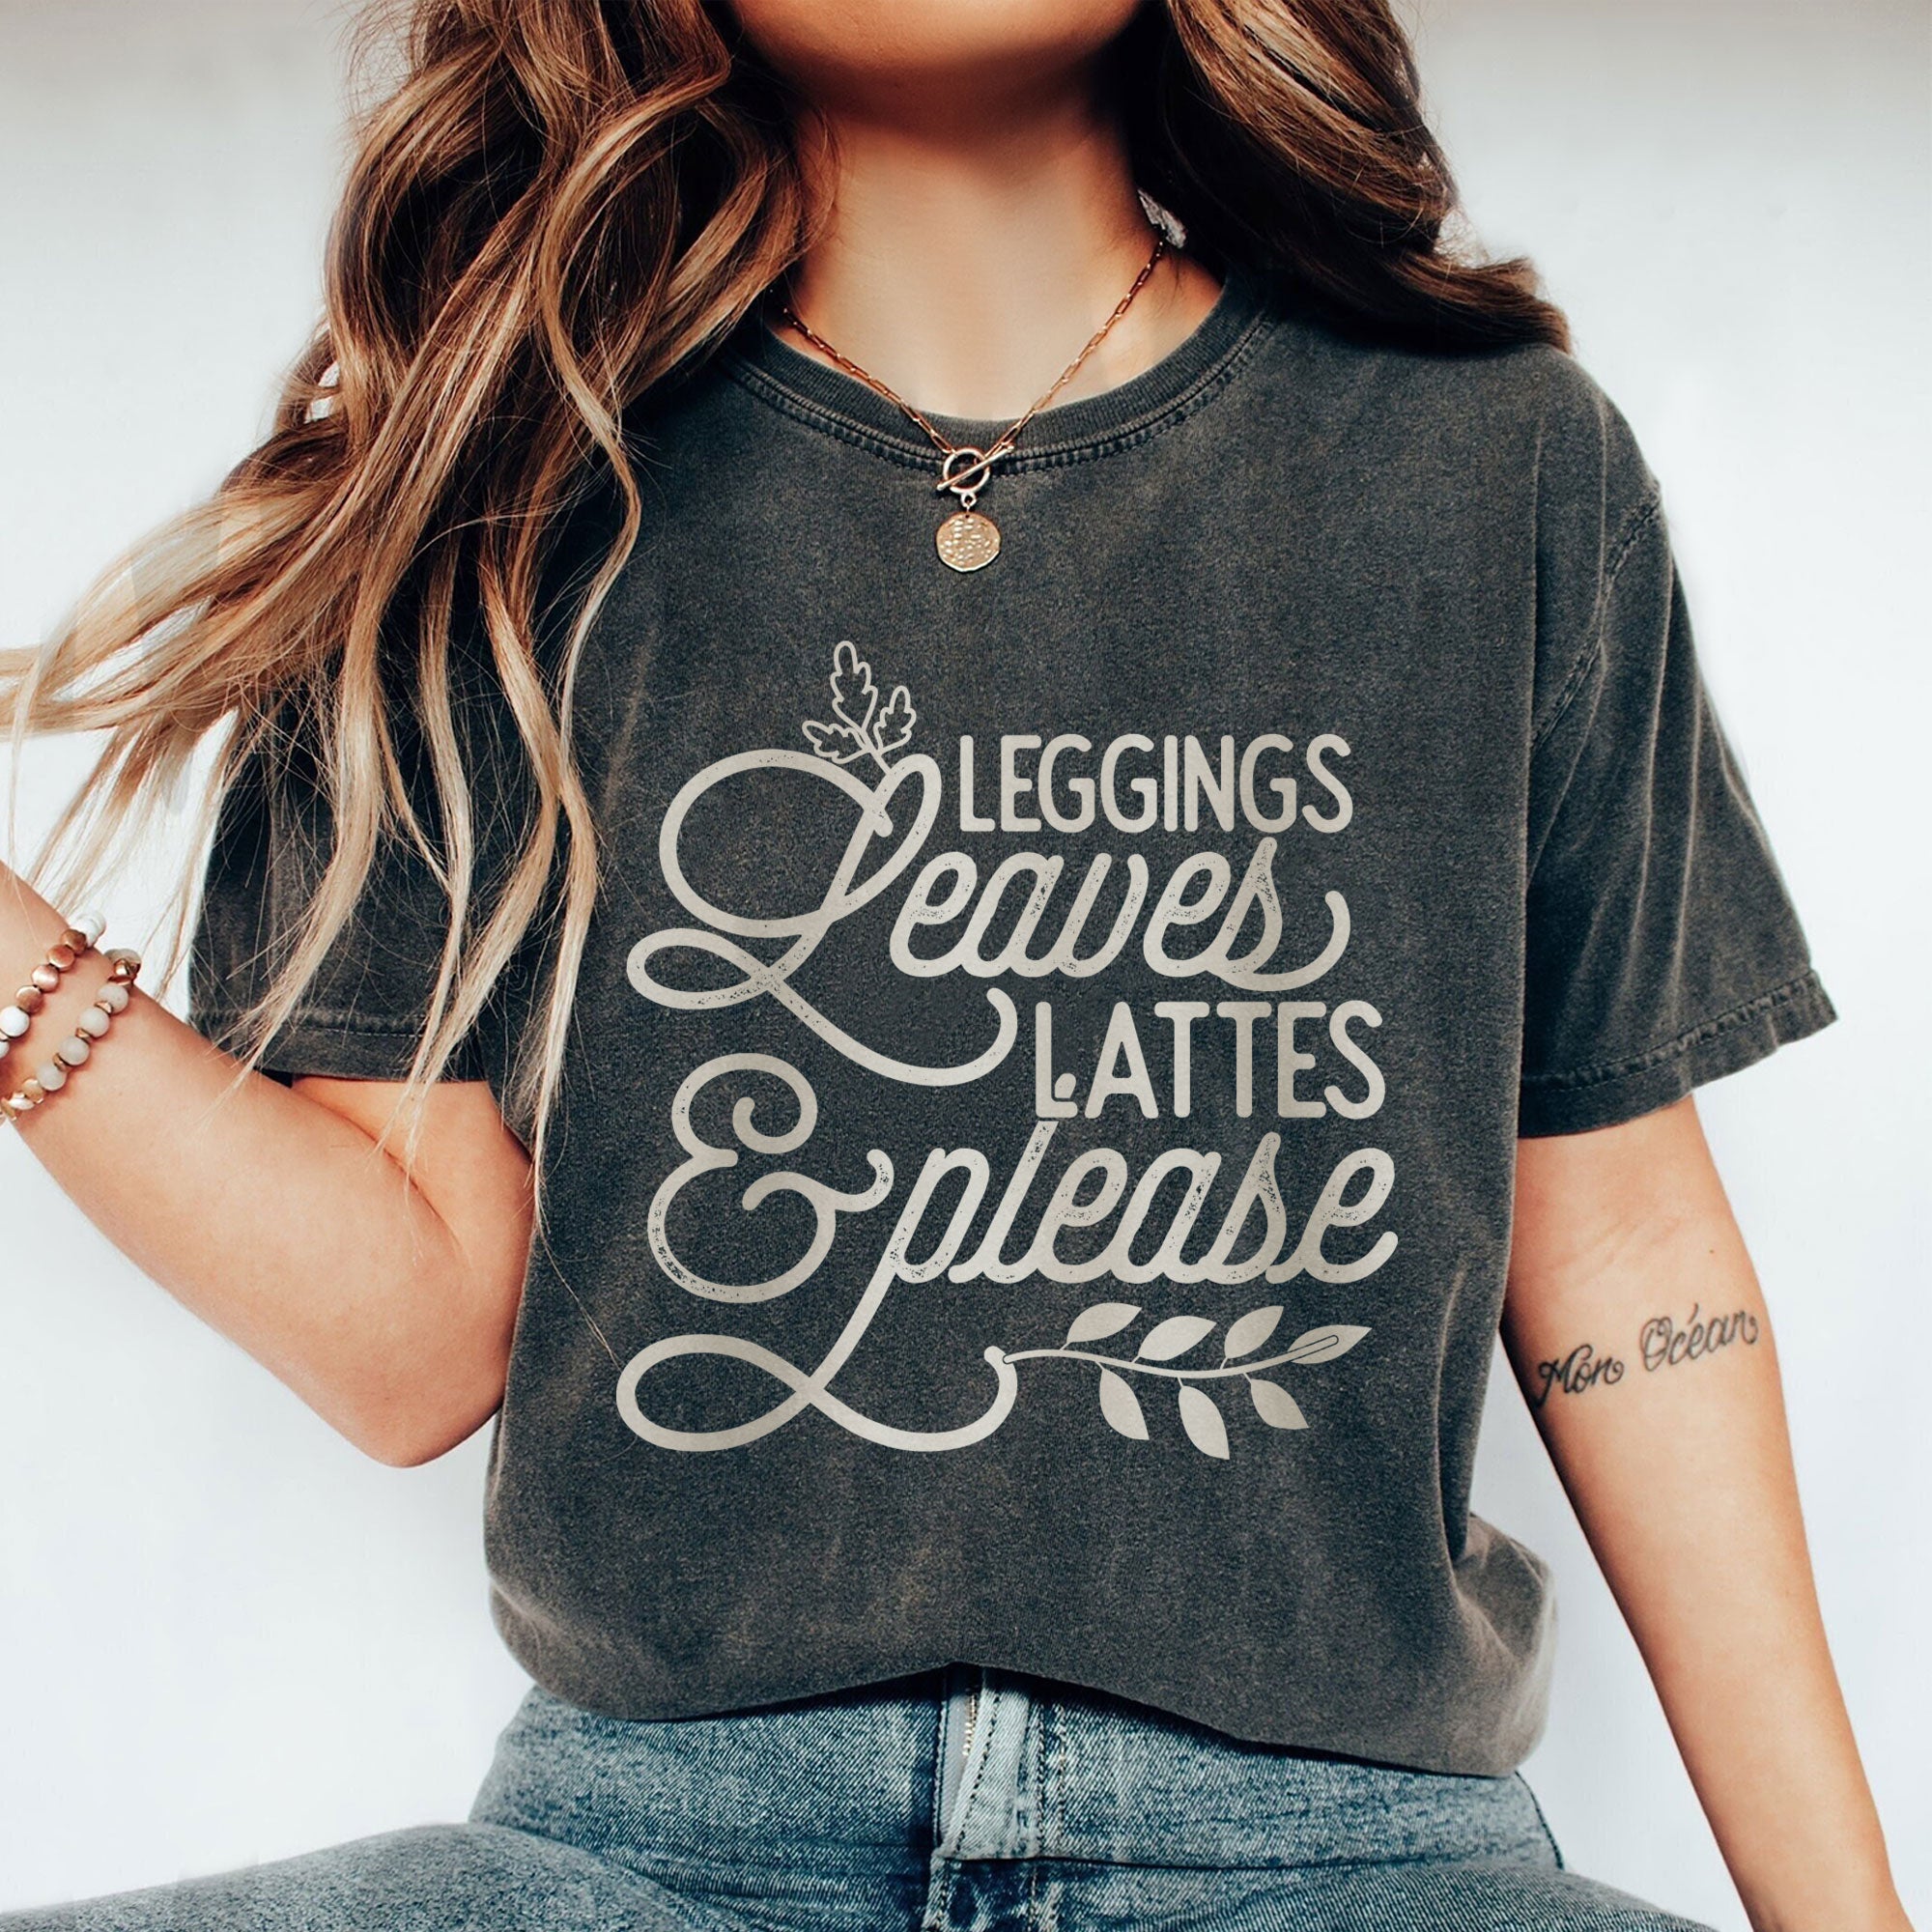 Leggings Leaves & Lattes Please Women's Relaxed Crewneck Graphic T